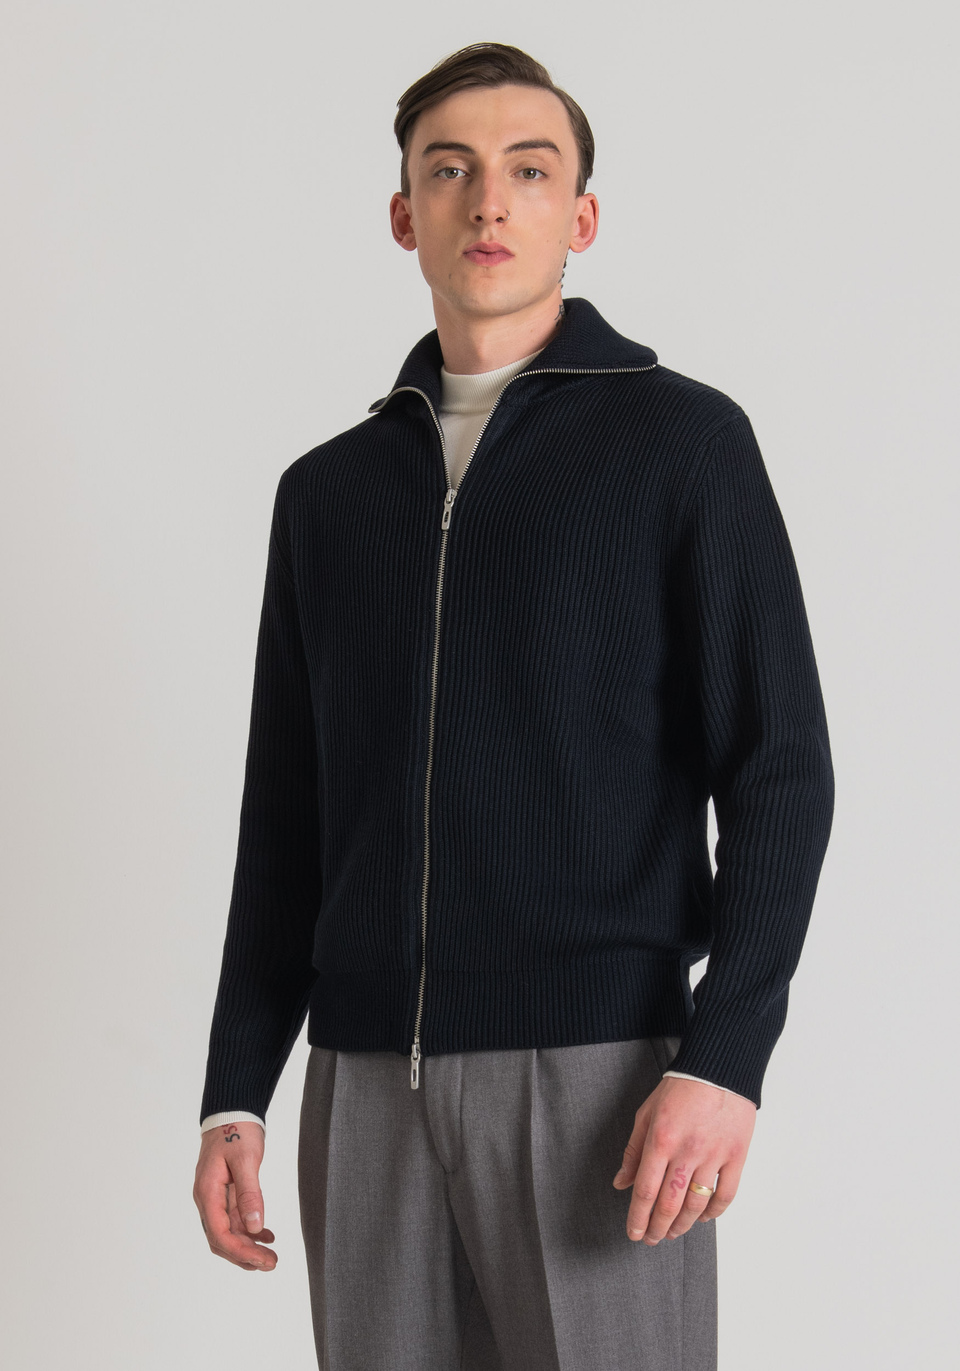 REGULAR FIT SWEATSHIRT WITH ZIP IN WOOL BLEND YARN WITH ALL-OVER ENGLISH RIB - Antony Morato Online Shop